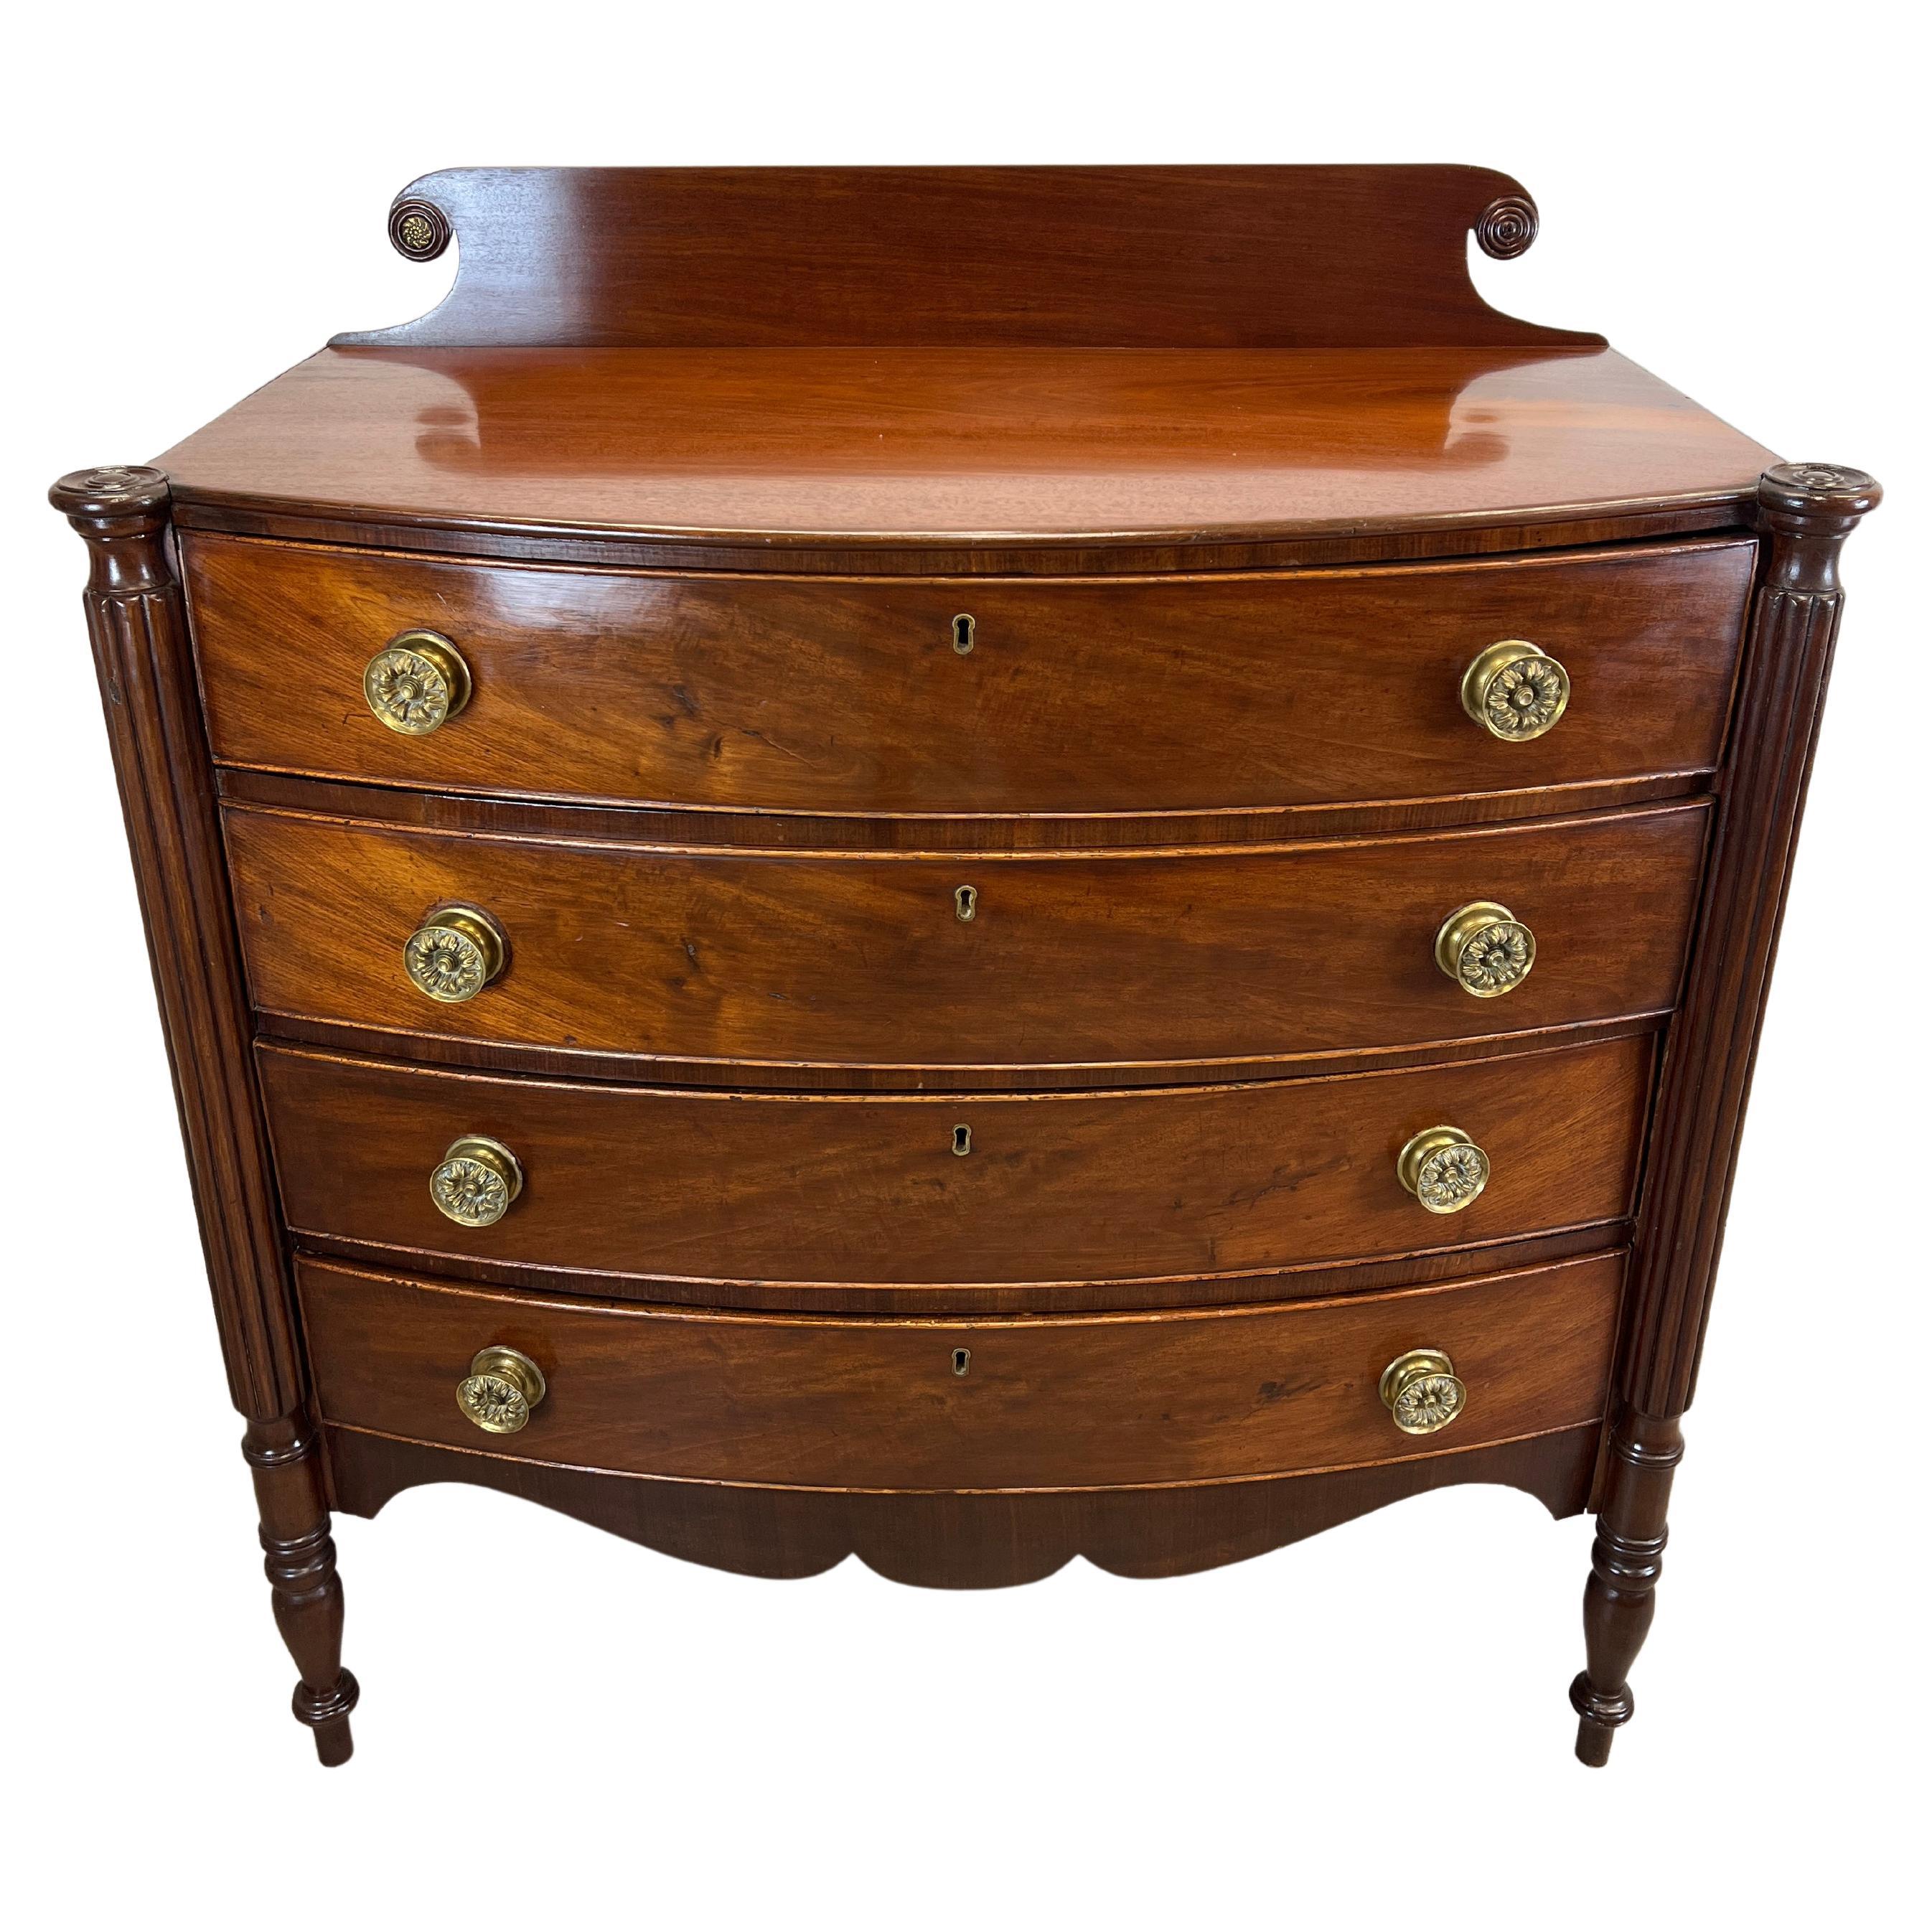 Early 19th Century American Sheraton Bow Front Chest of Drawers For Sale